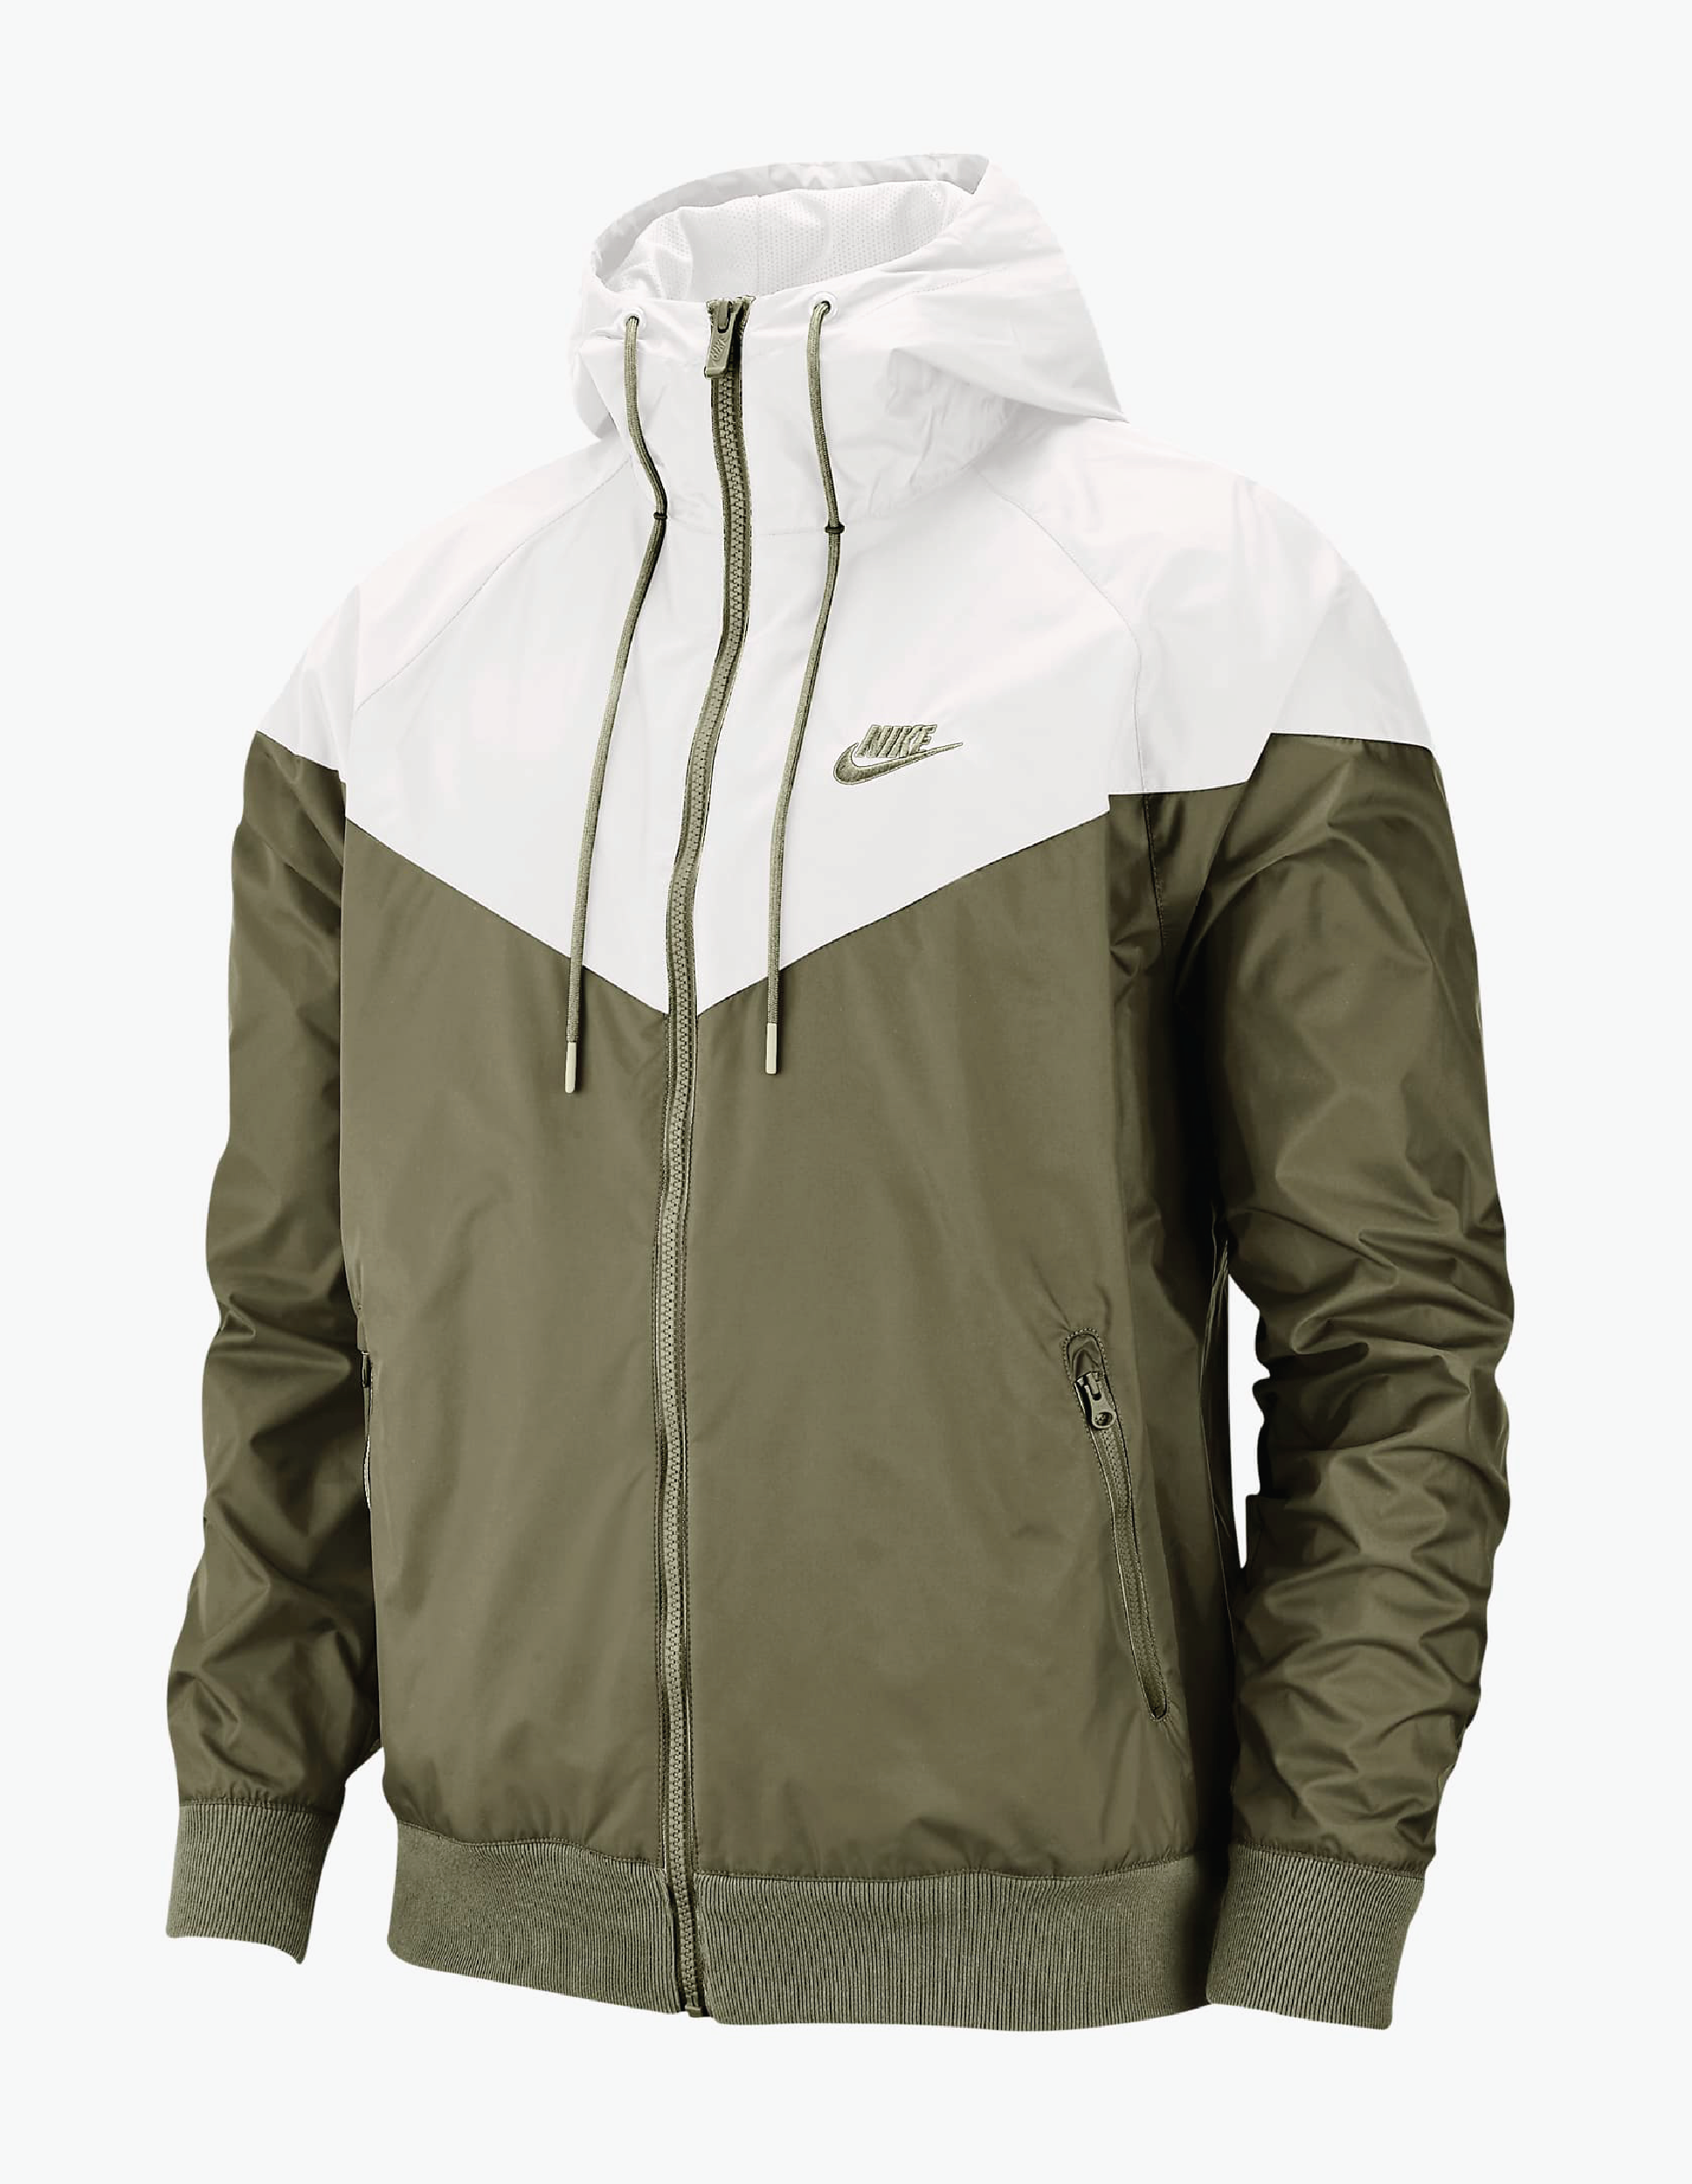 The green and white version of the windbreaker has a drawstring hood